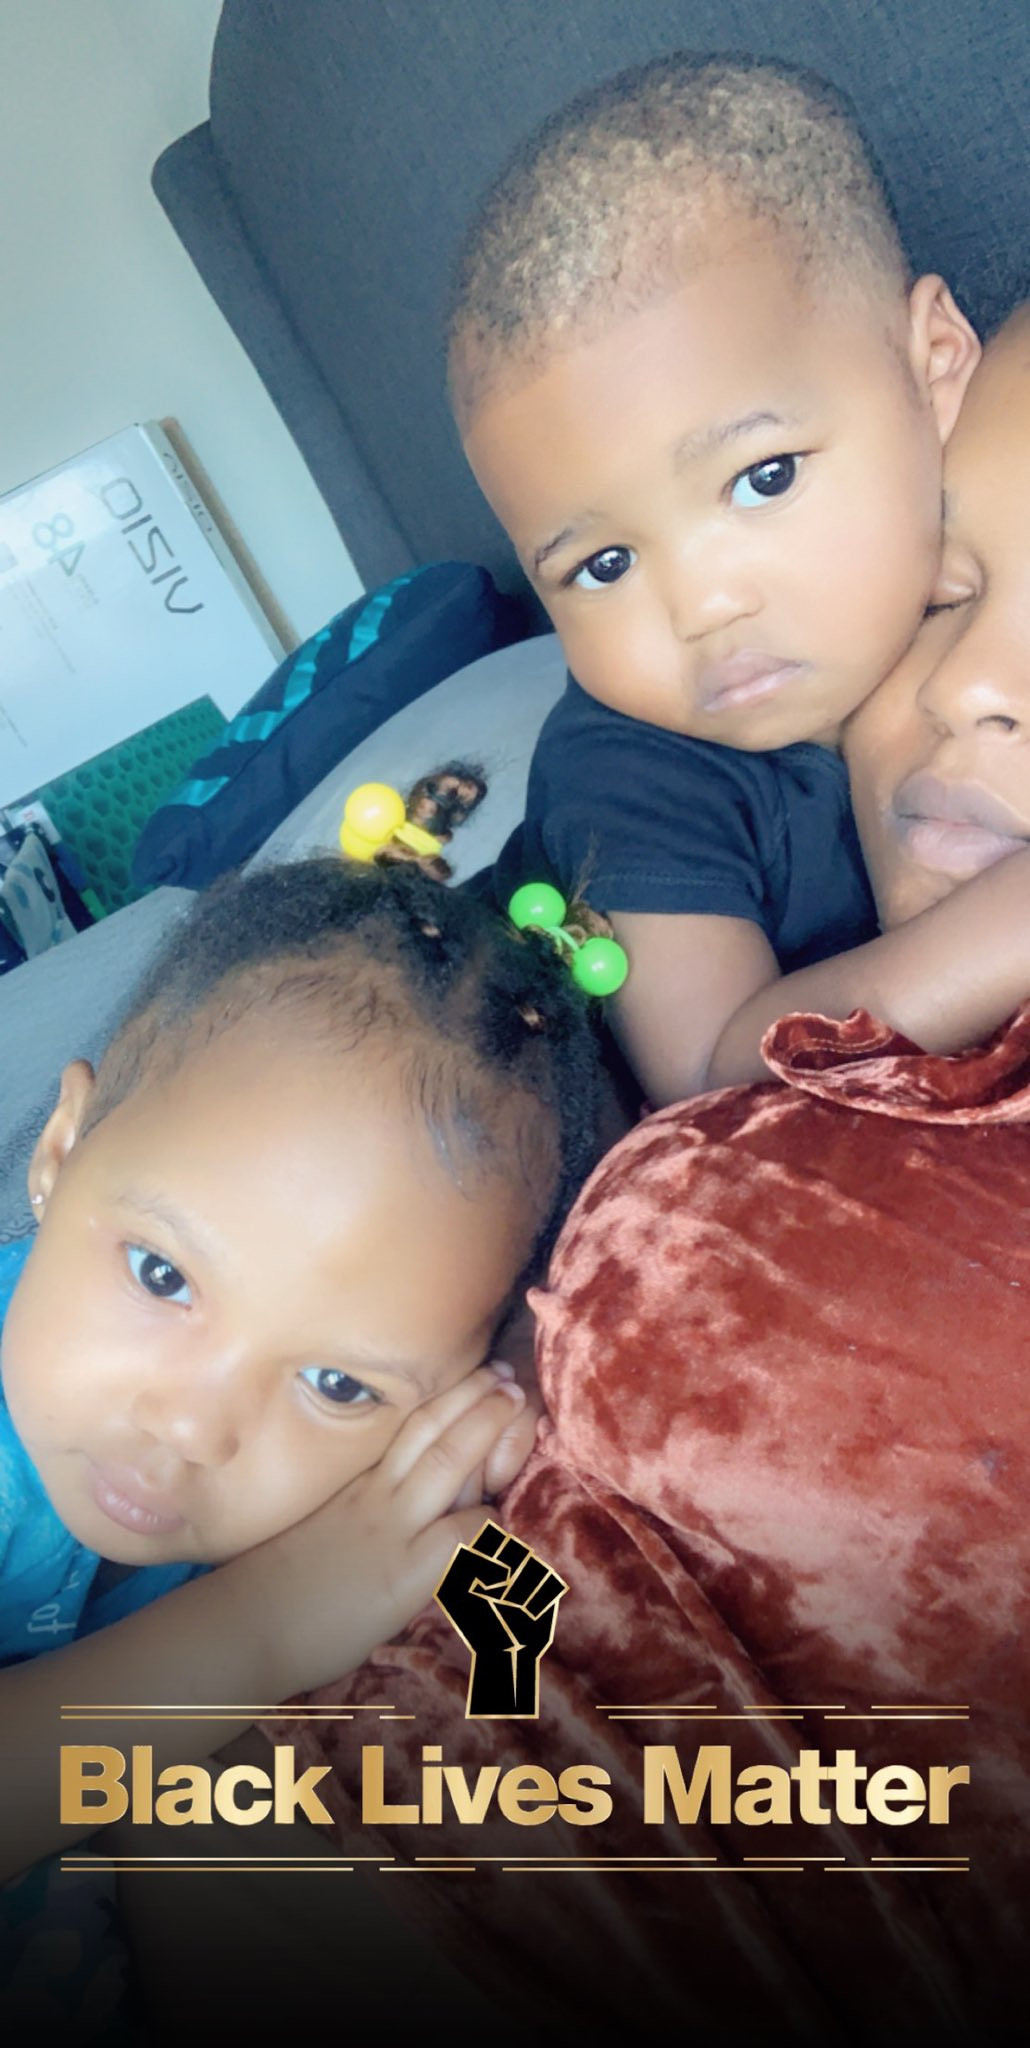 Emma Nyra shares lovely photos of her twin children, Alexander and Alexandria